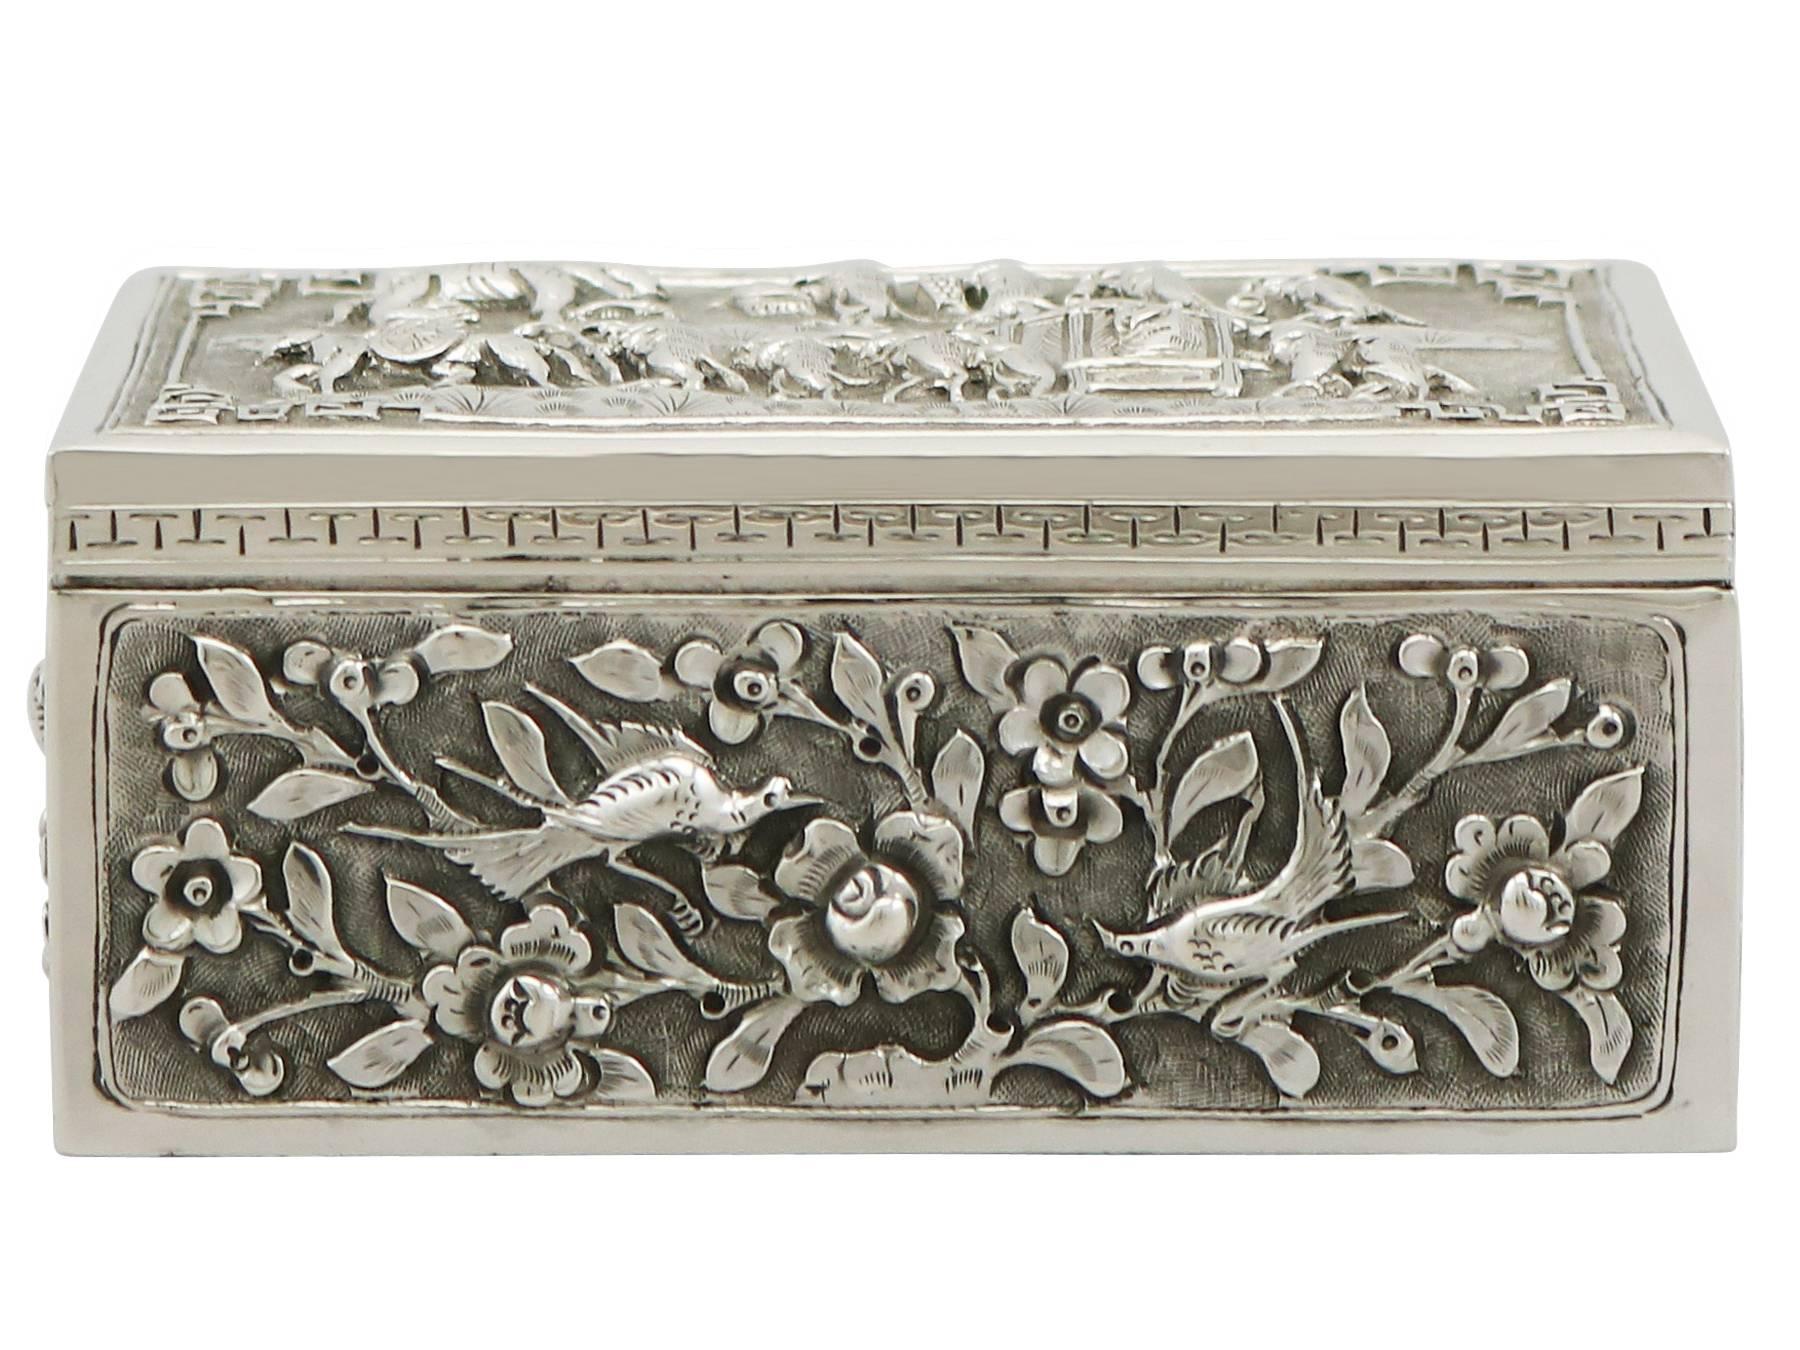 An exceptional, fine and impressive antique Chinese Export silver box; an addition to our oriental silver collection.

This exceptional antique Chinese Export Silver (CES) box has a rectangular form. The surface of this silver box is embellished